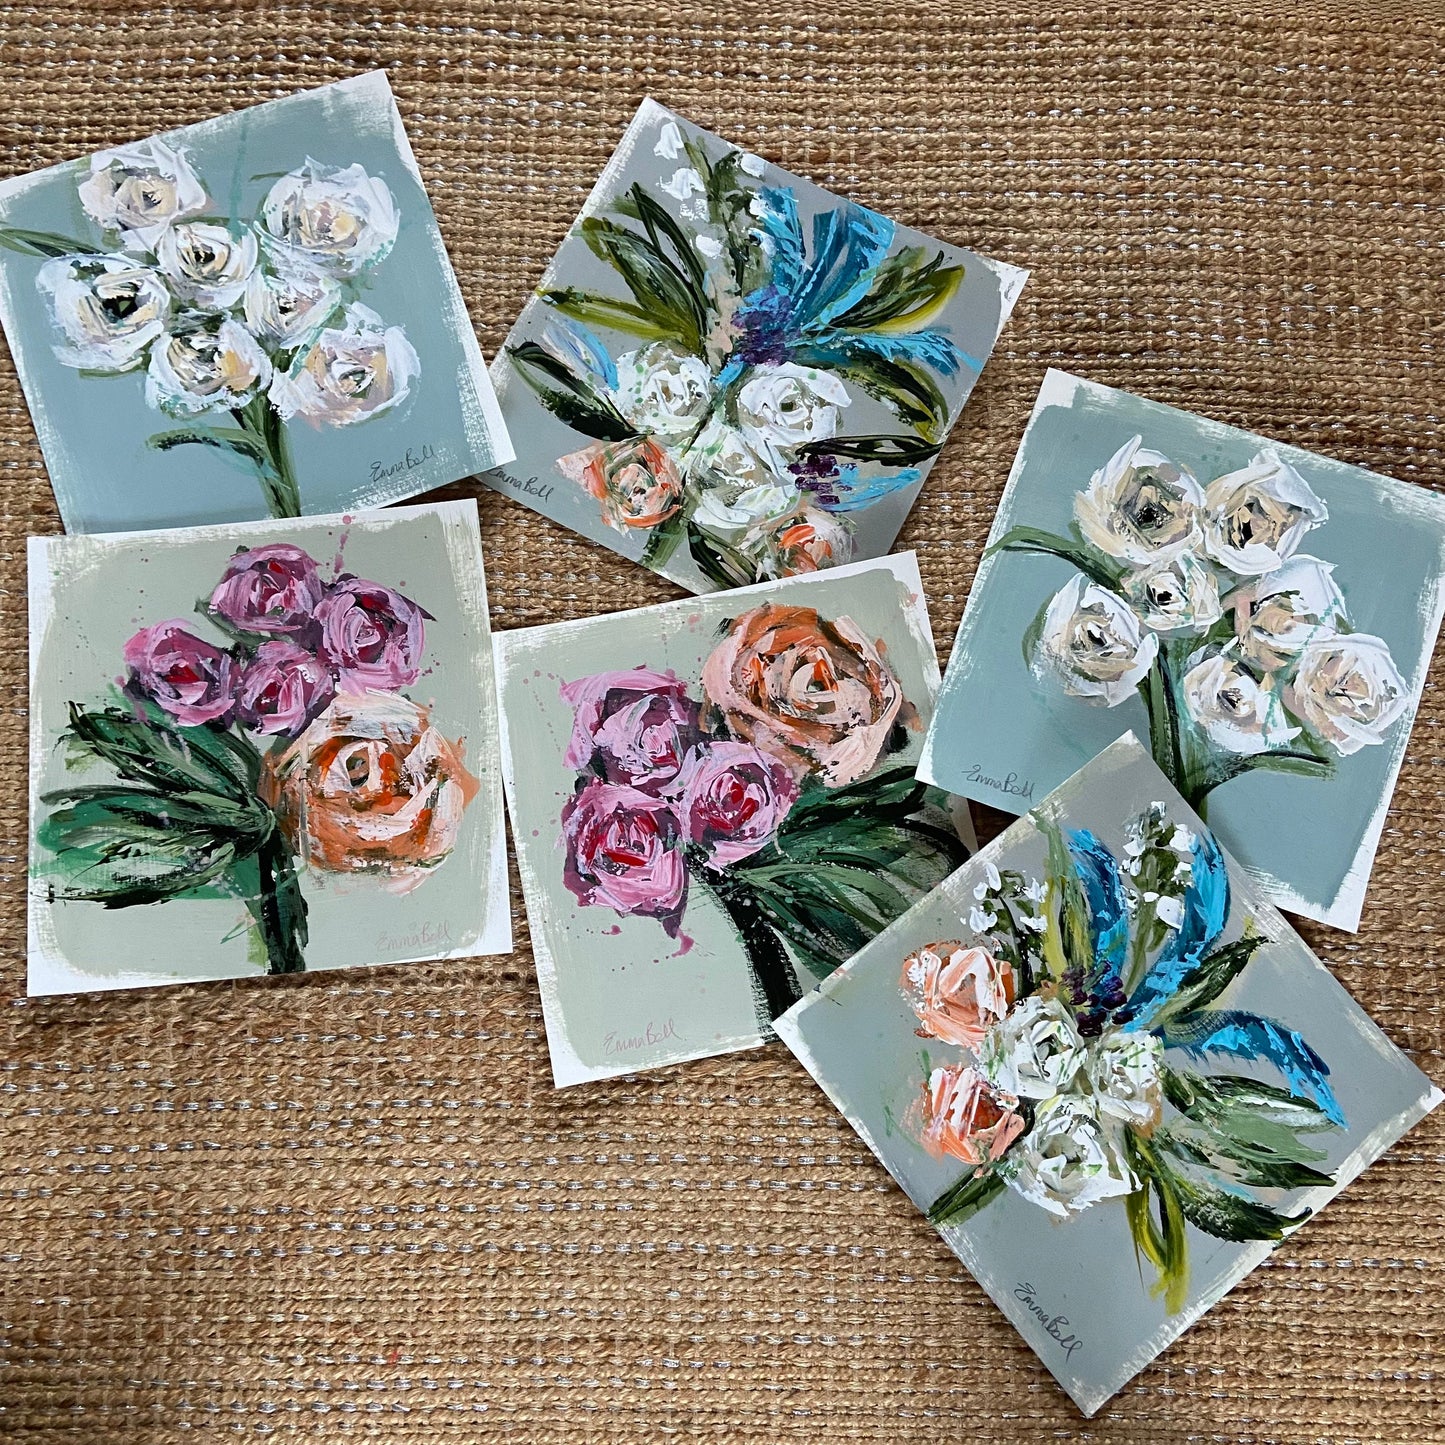 Small floral painting